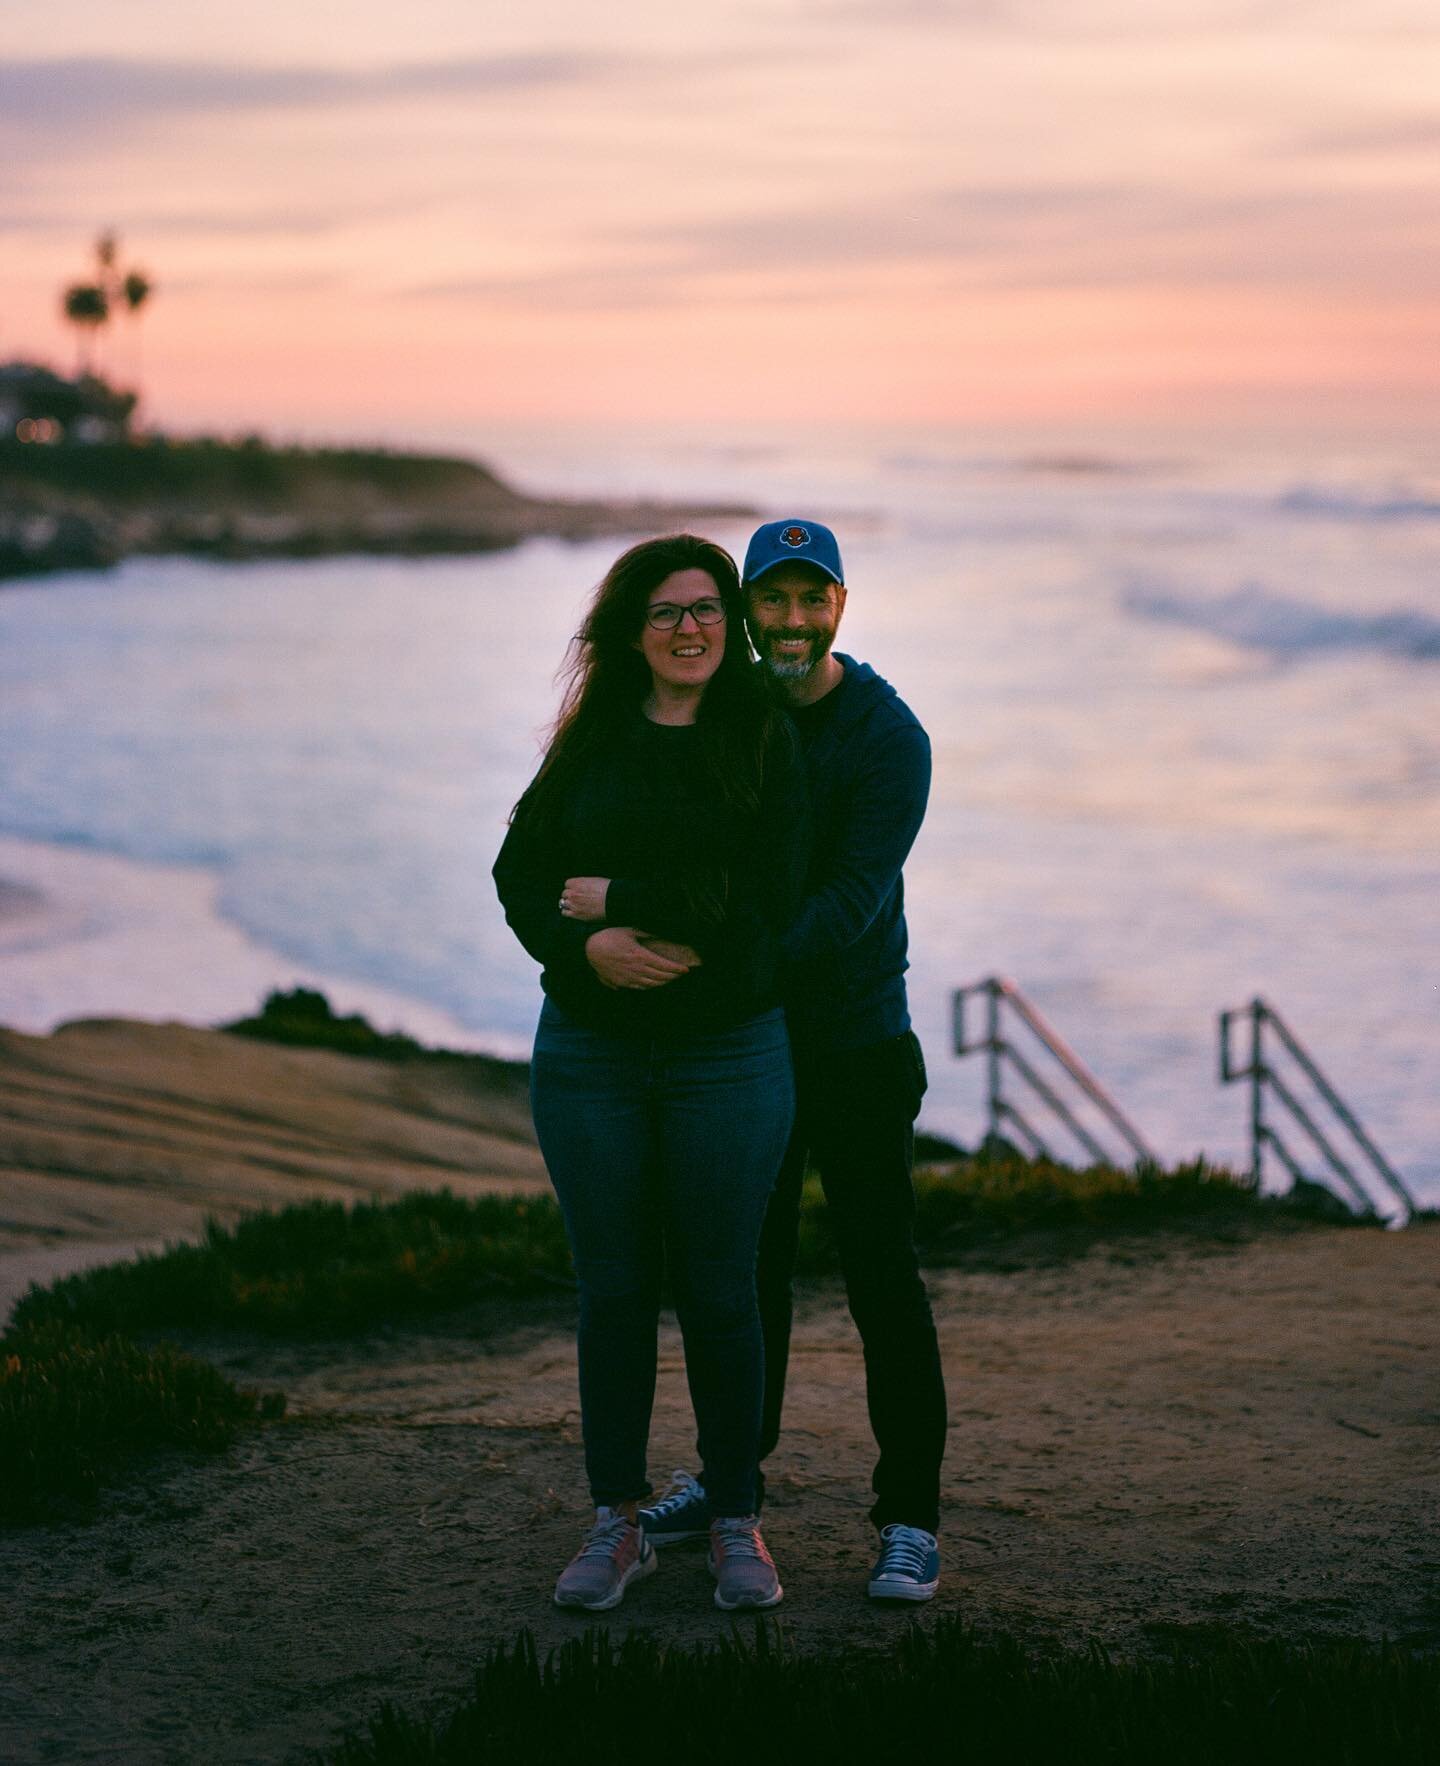 My amazing wife and me in La Jolla earlier this year. Our middle son, Aiden, officially took the photo. So, I&rsquo;d like to blame him that we were a little underexposed, but I was the one who set up the shot. 😂 Just not quite enough light left for